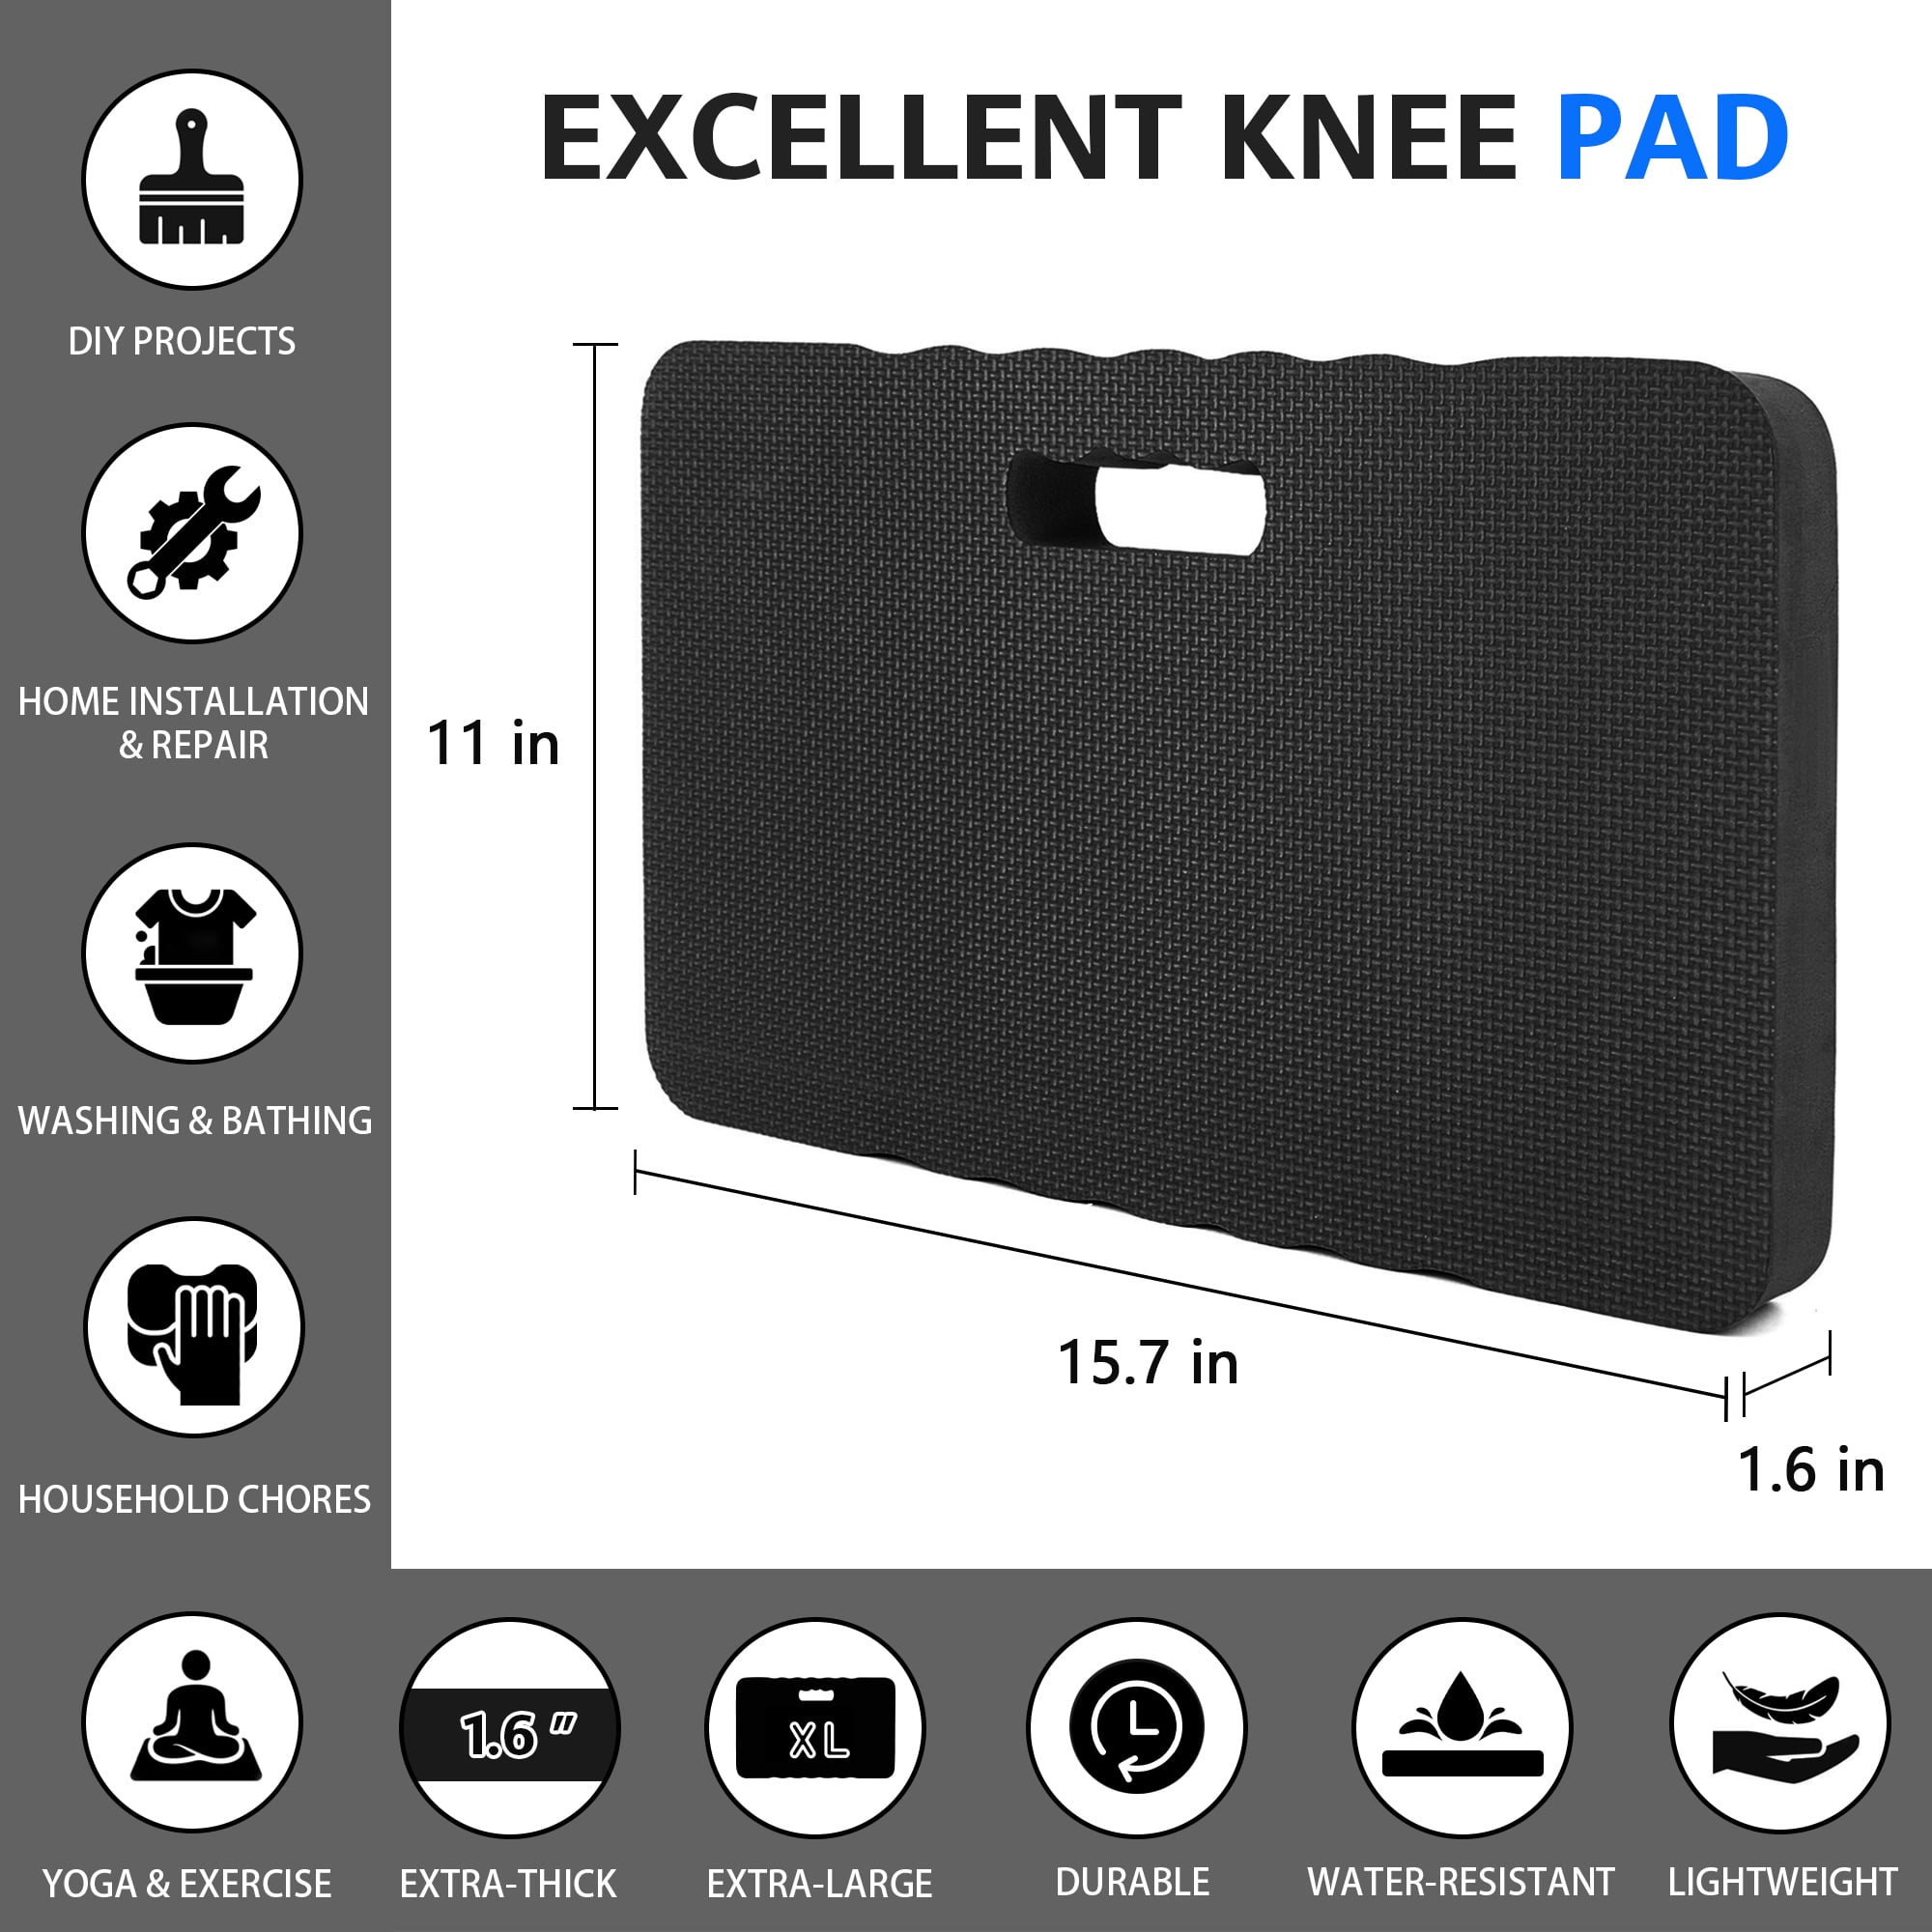 Gorilla Grip Extra Thick Kneeling Pad, Supportive Soft Foam Cushioning for Knee, Water Resistant Construction for Gardening, Bat